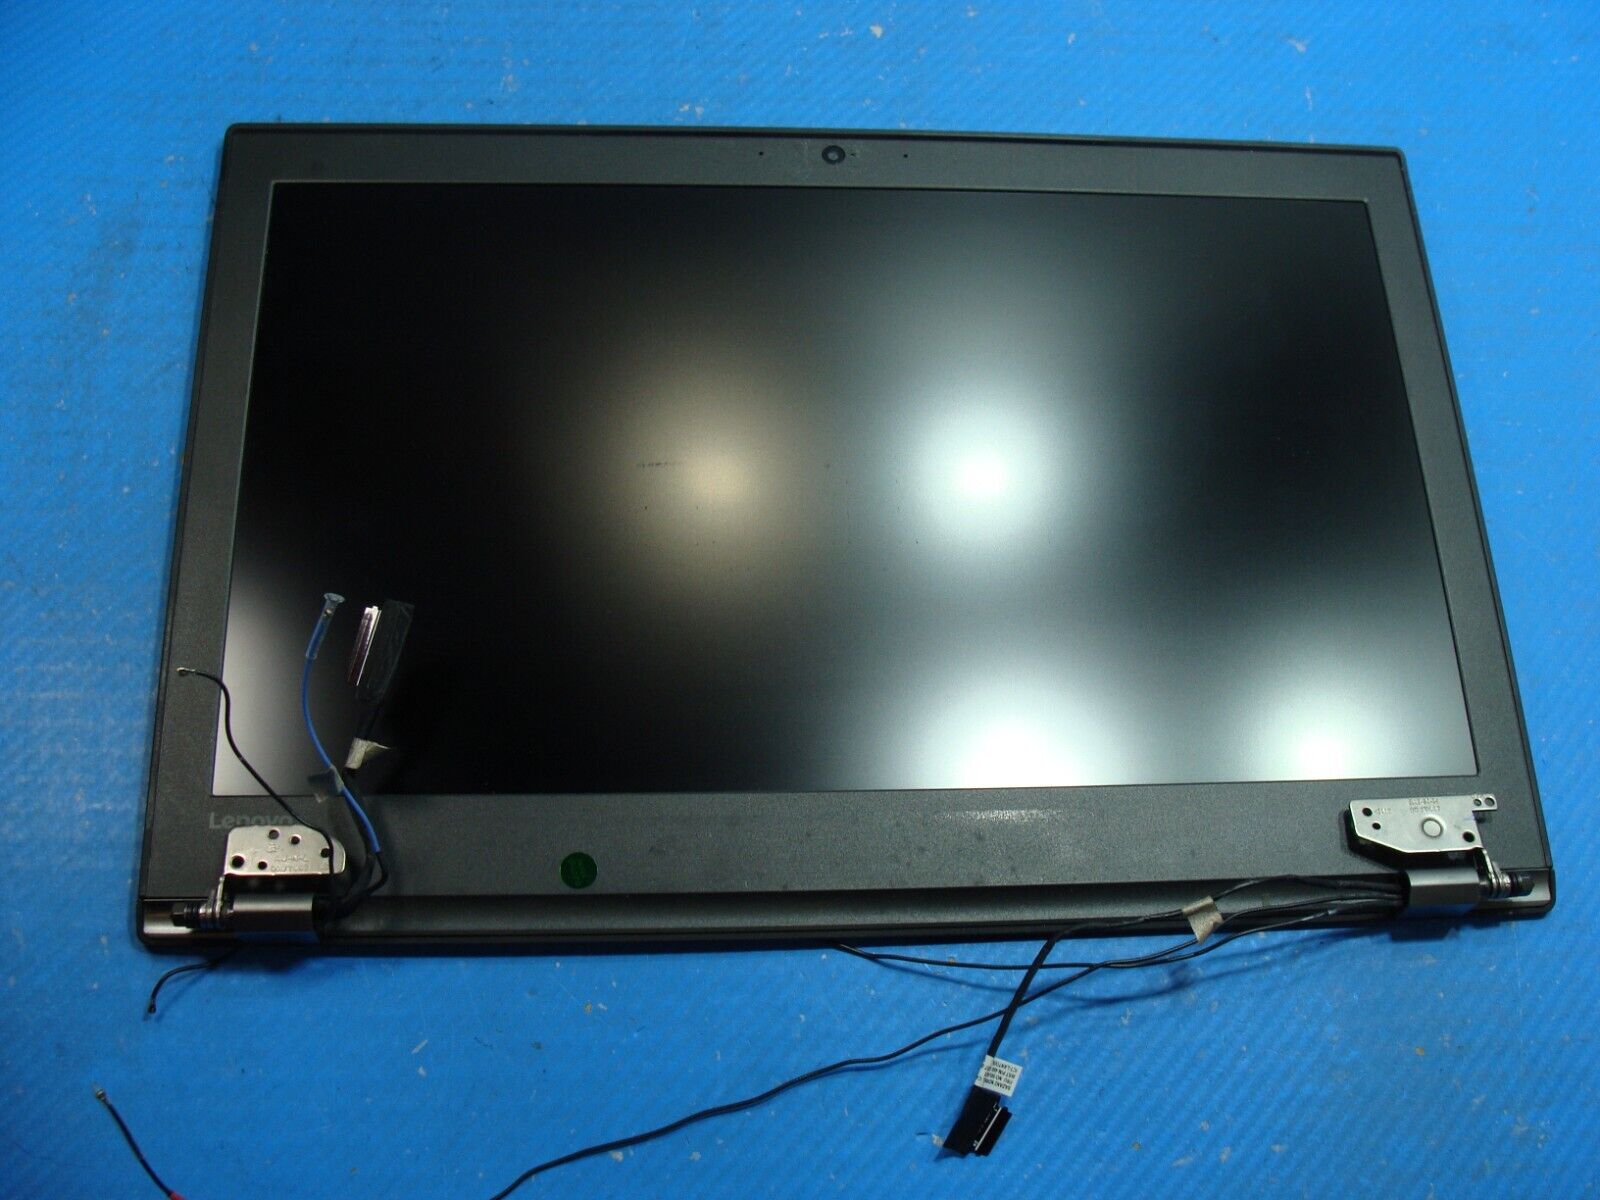 Lenovo Thinkpad T560 15.6 Matte FHD LCD Screen Complete Assembly